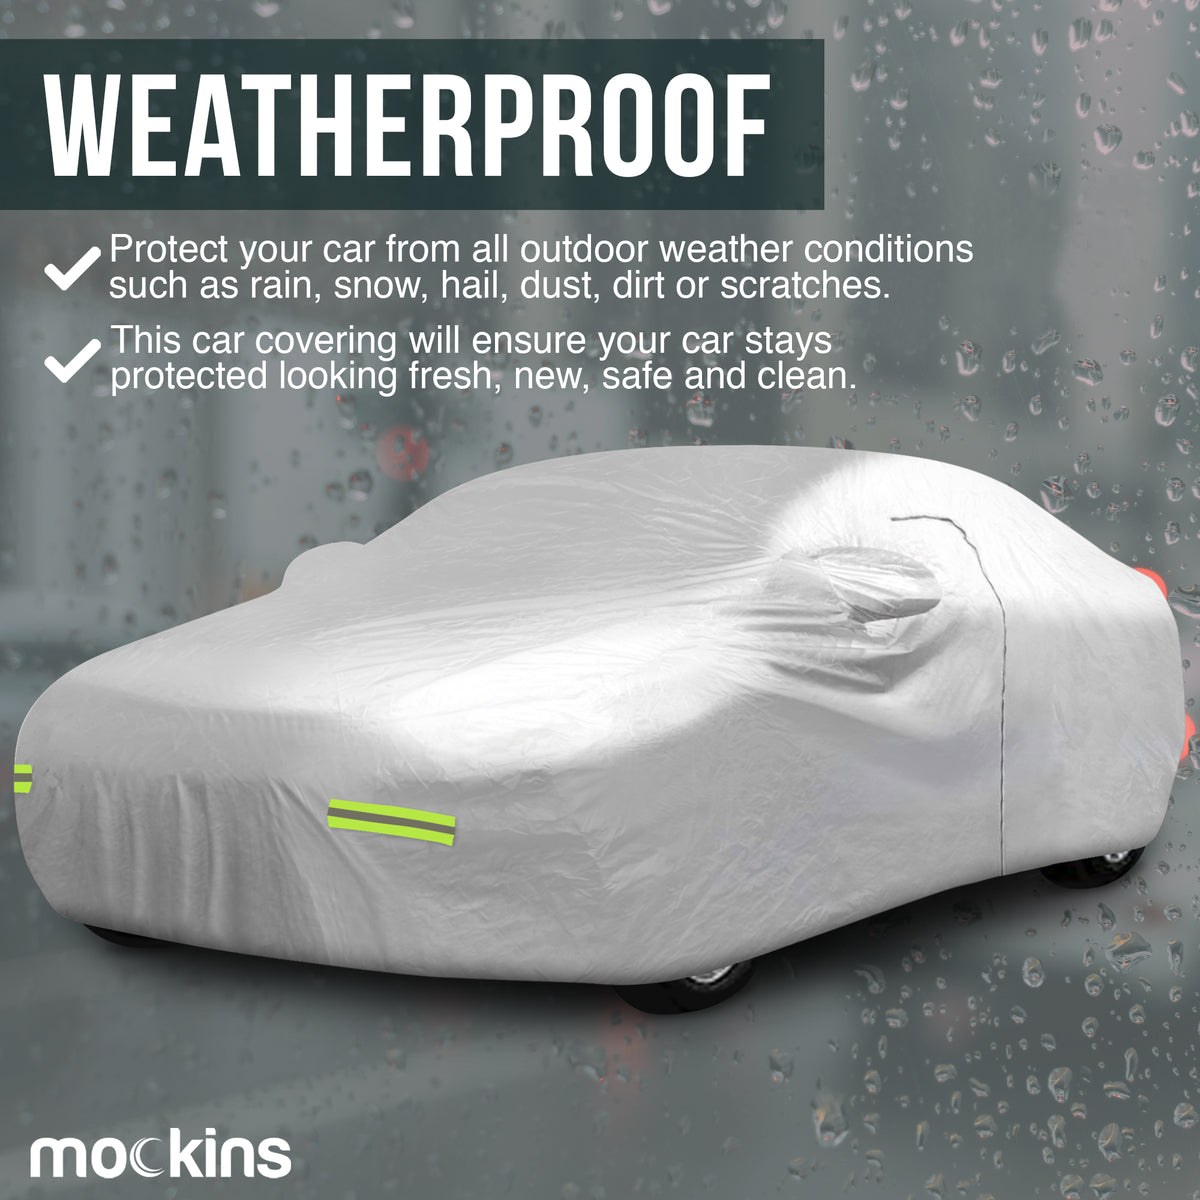 Mockins Waterproof Car &amp; SUV Covers Are Weatherproof Which Protects Your Car From All Outdoor Weather Conditions Such As Rain ,Snow ,Hail ,Dust Dirt Or Scratches